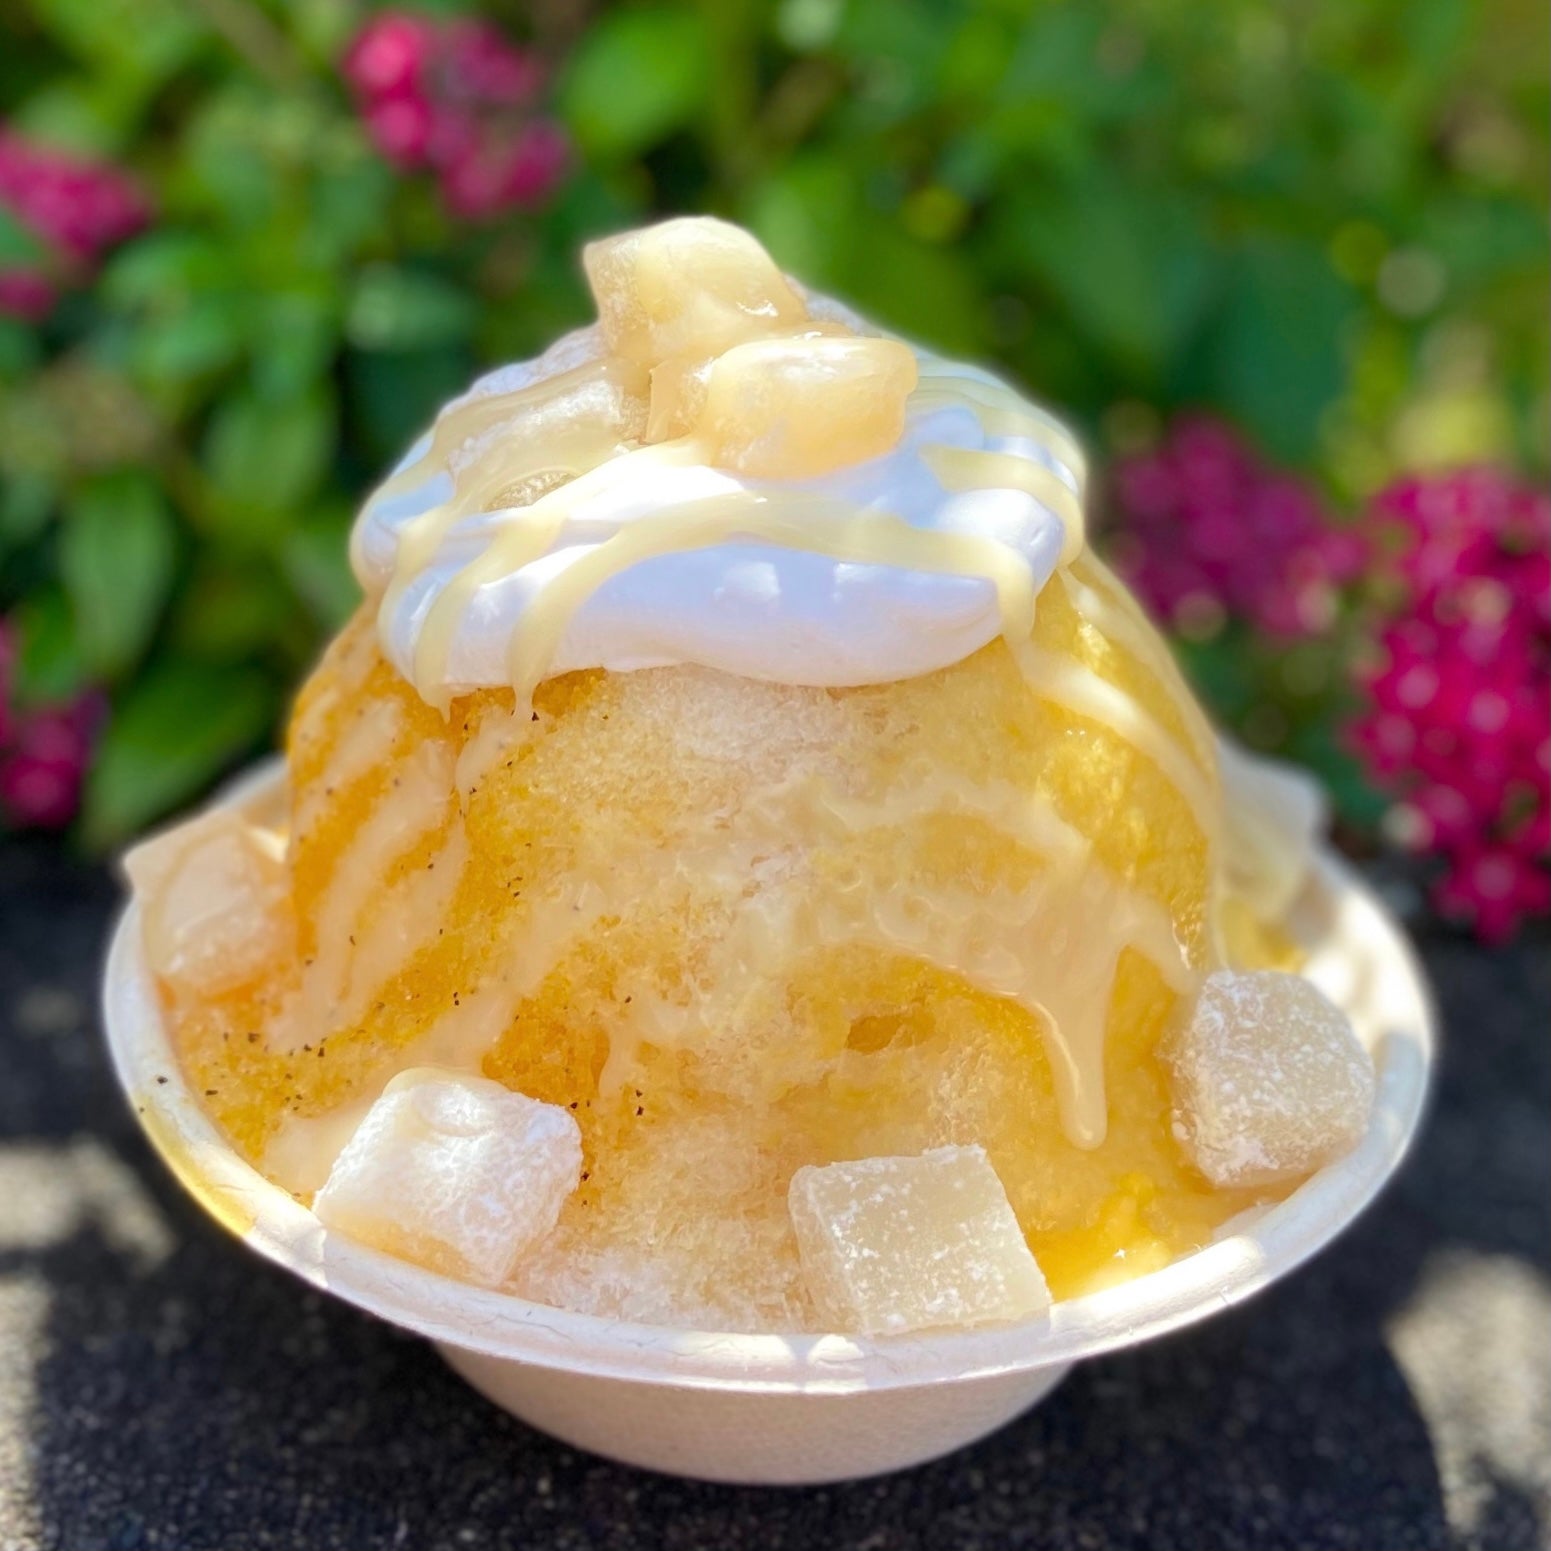 Where to find the best shave ice in Hawaii